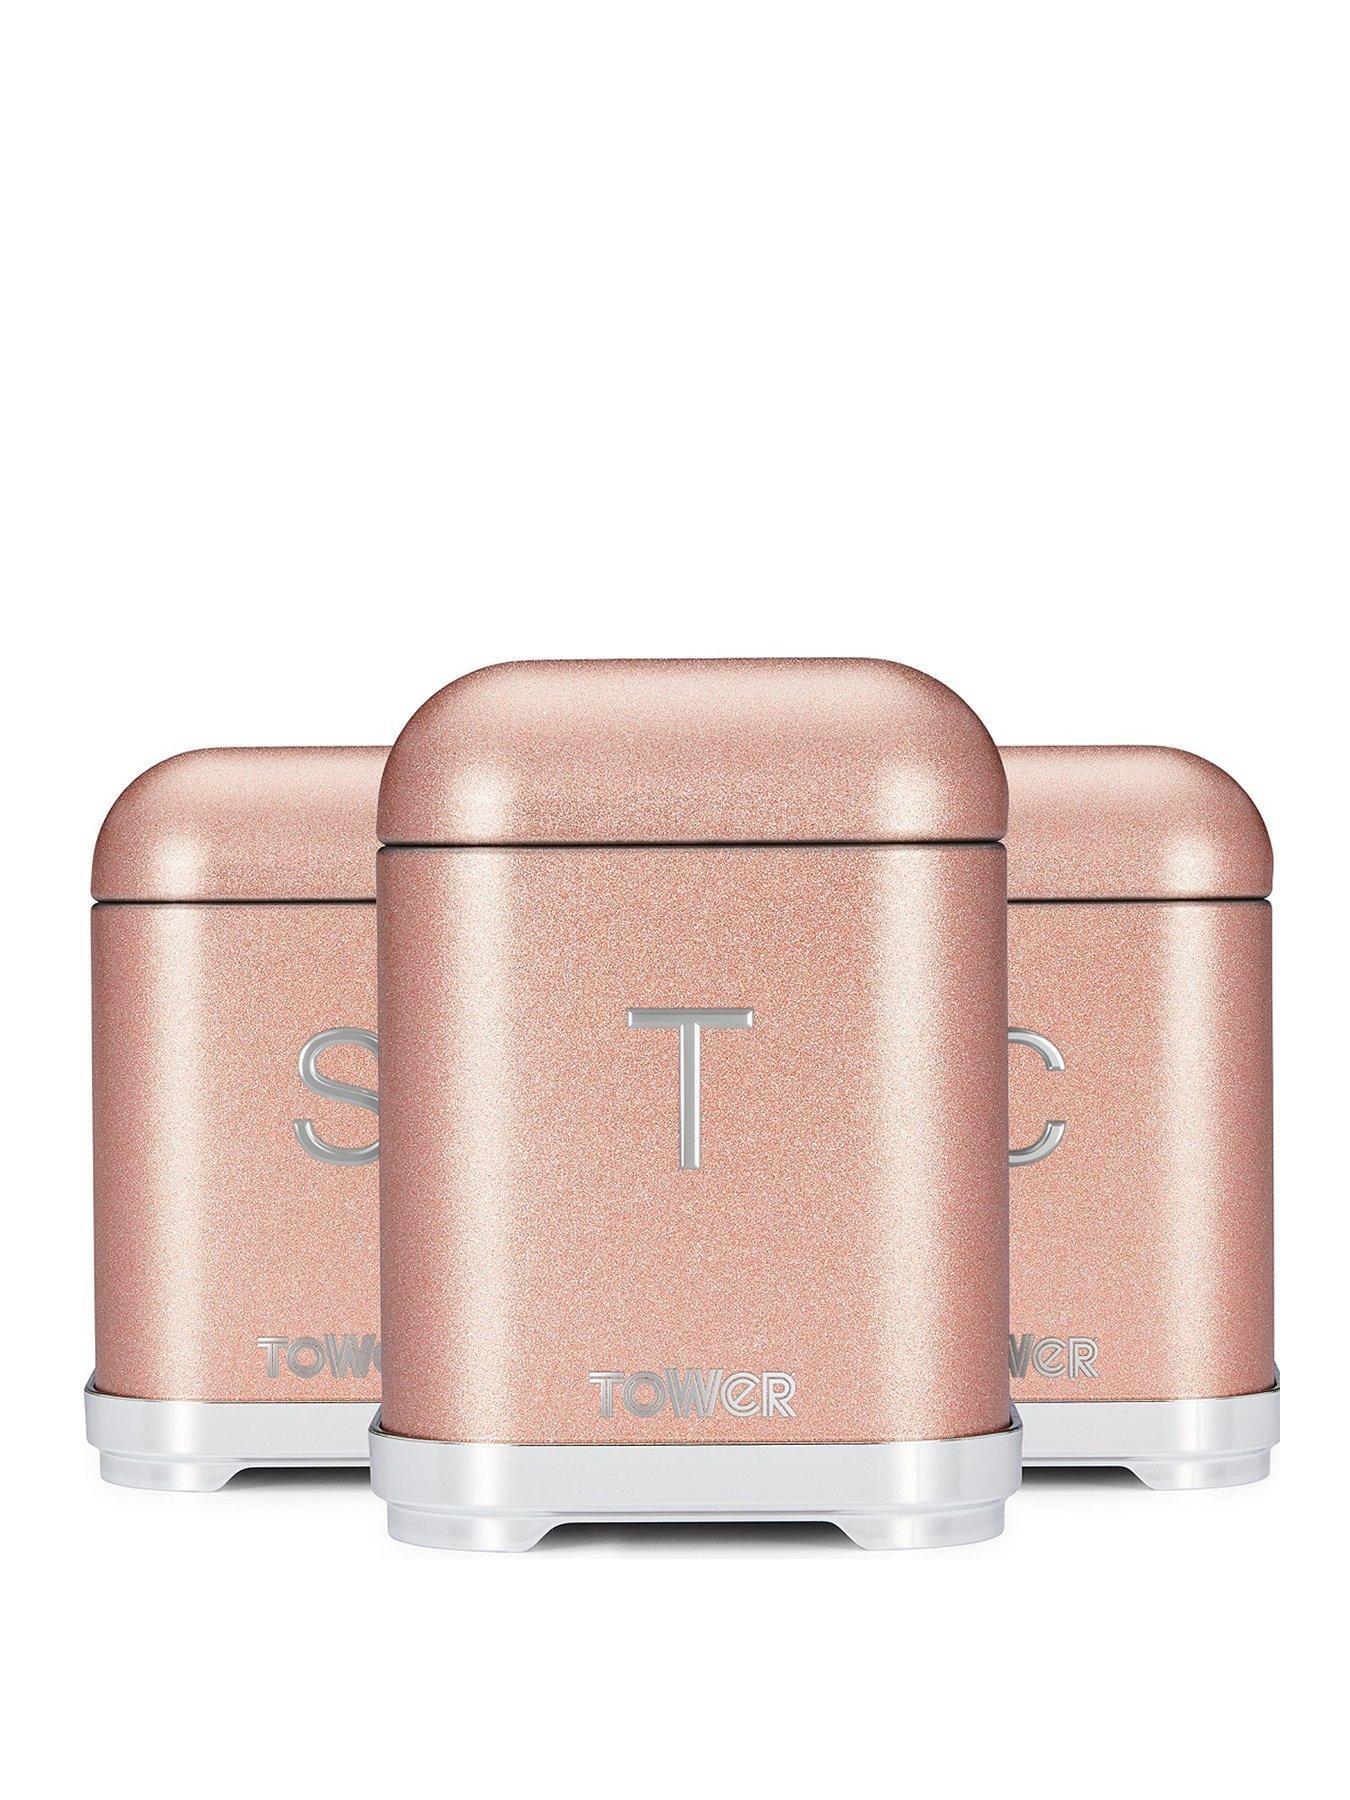 https://media.very.co.uk/i/very/PC7RX_SQ1_0000000088_NO_COLOR_SLf/tower-glitz-storage-canisters-in-blush-pink.jpg?$180x240_retinamobilex2$